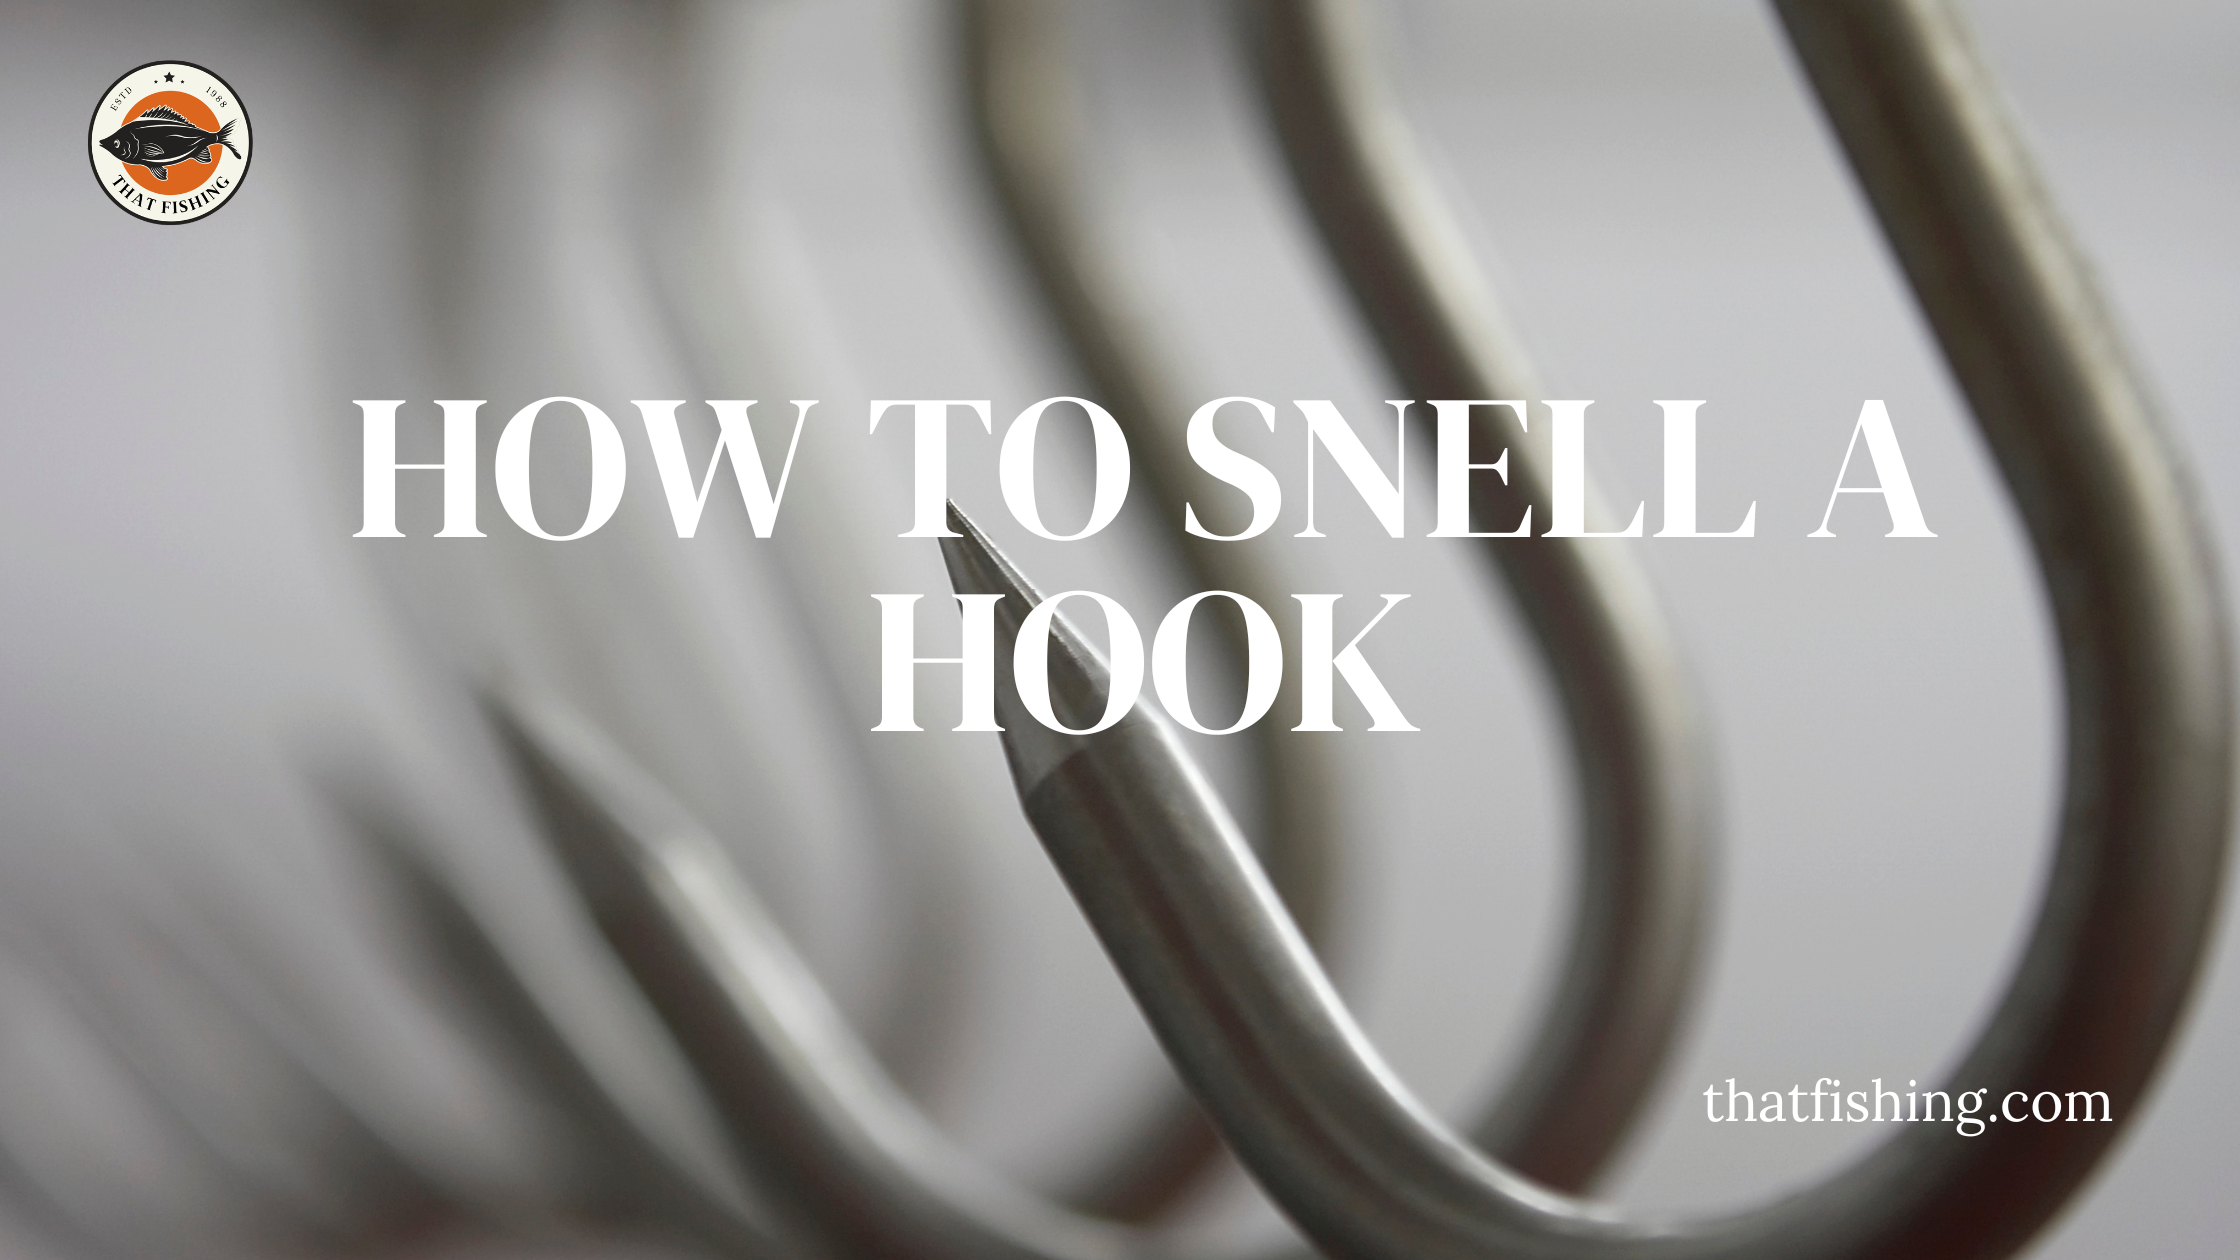 How To Snell A Hook: The 2 Easy Methods